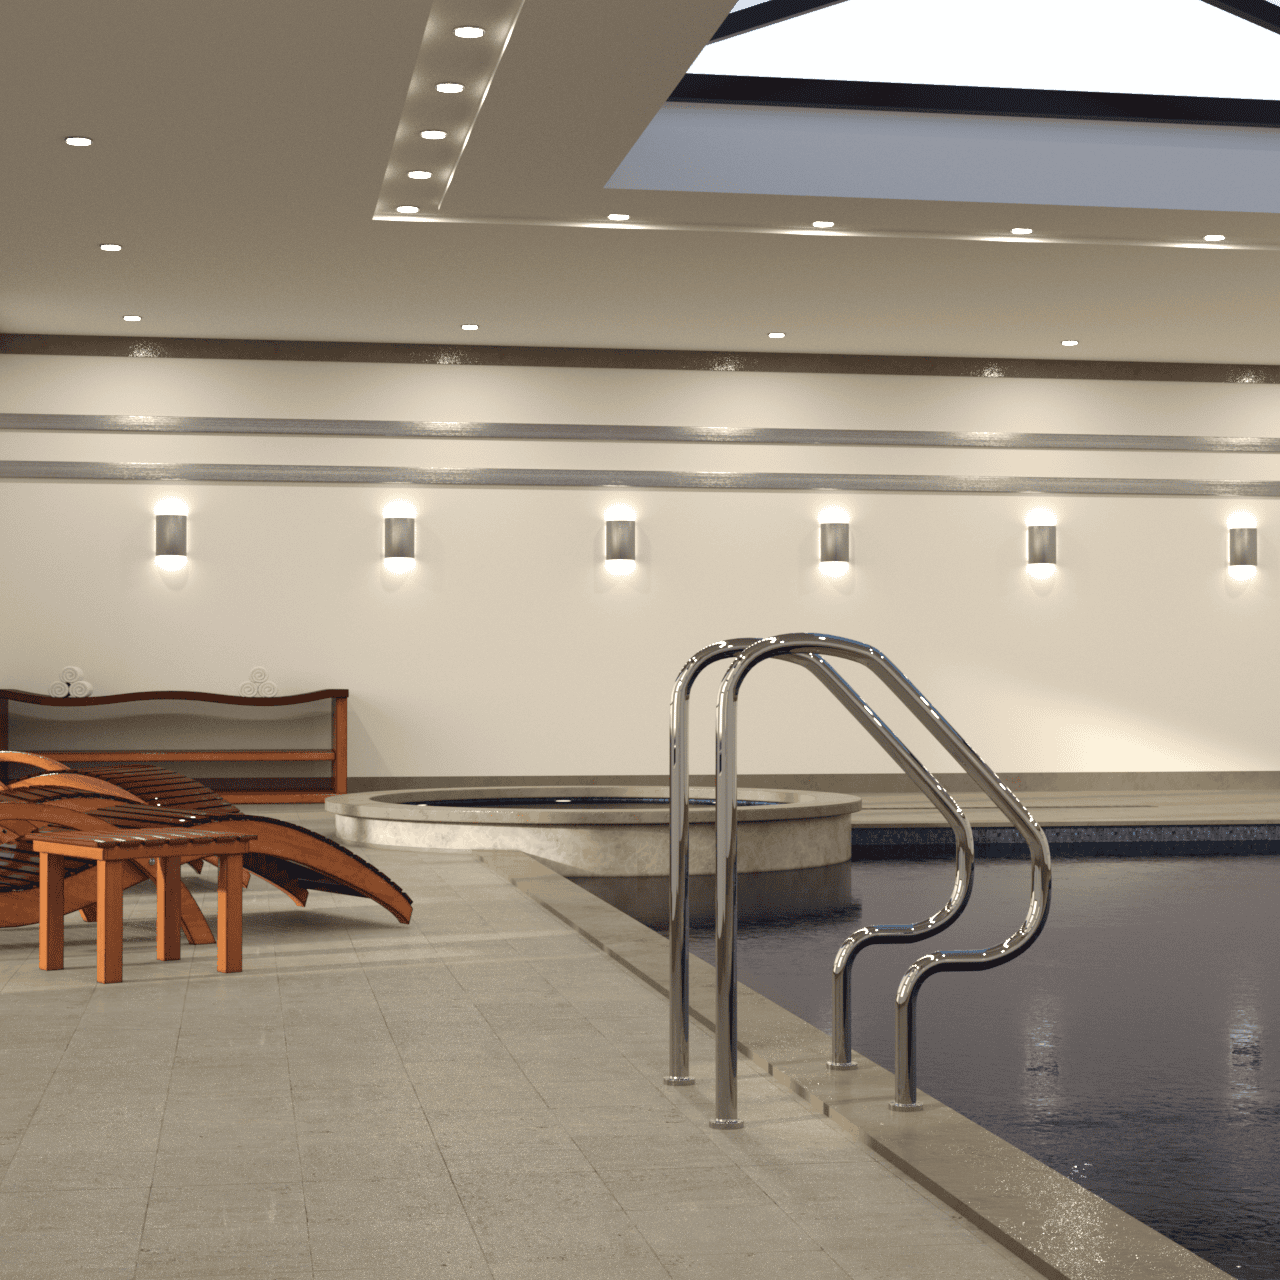 Rendering of a pool entrance and some deck chairs in the background